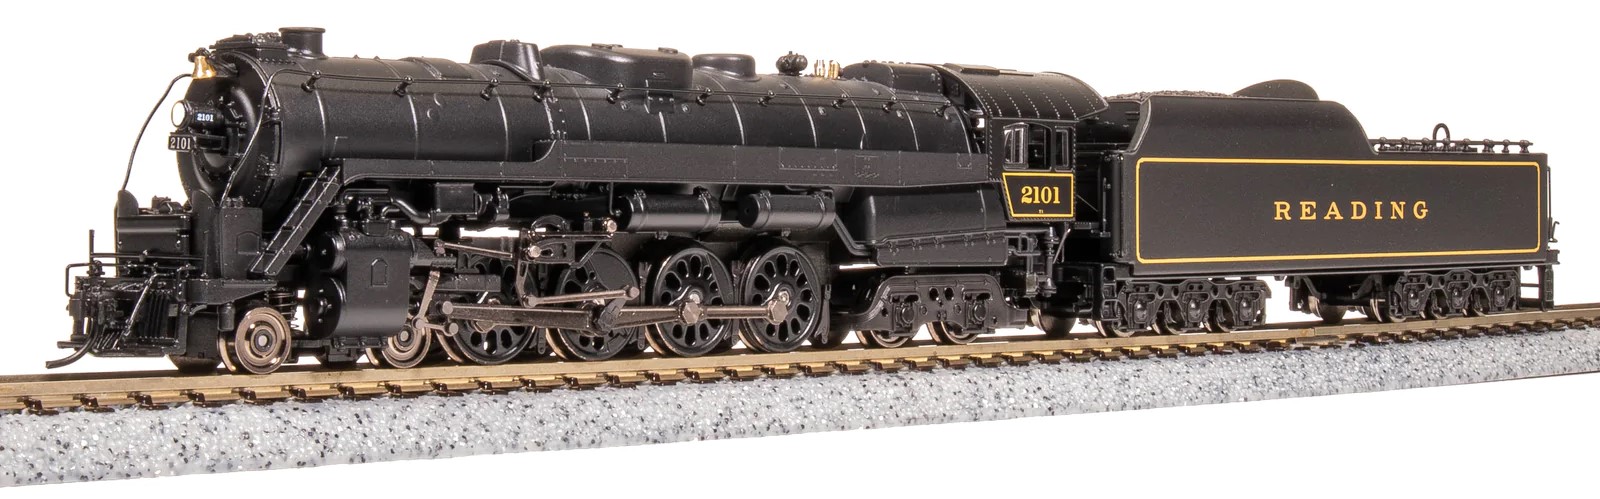 Broadway Limited Imports N 7402 Reading Class T-1 4-8-4 Locomotive Paragon4 Sound/DC/DCC/Smoke 'In Service Version' RDG #2115